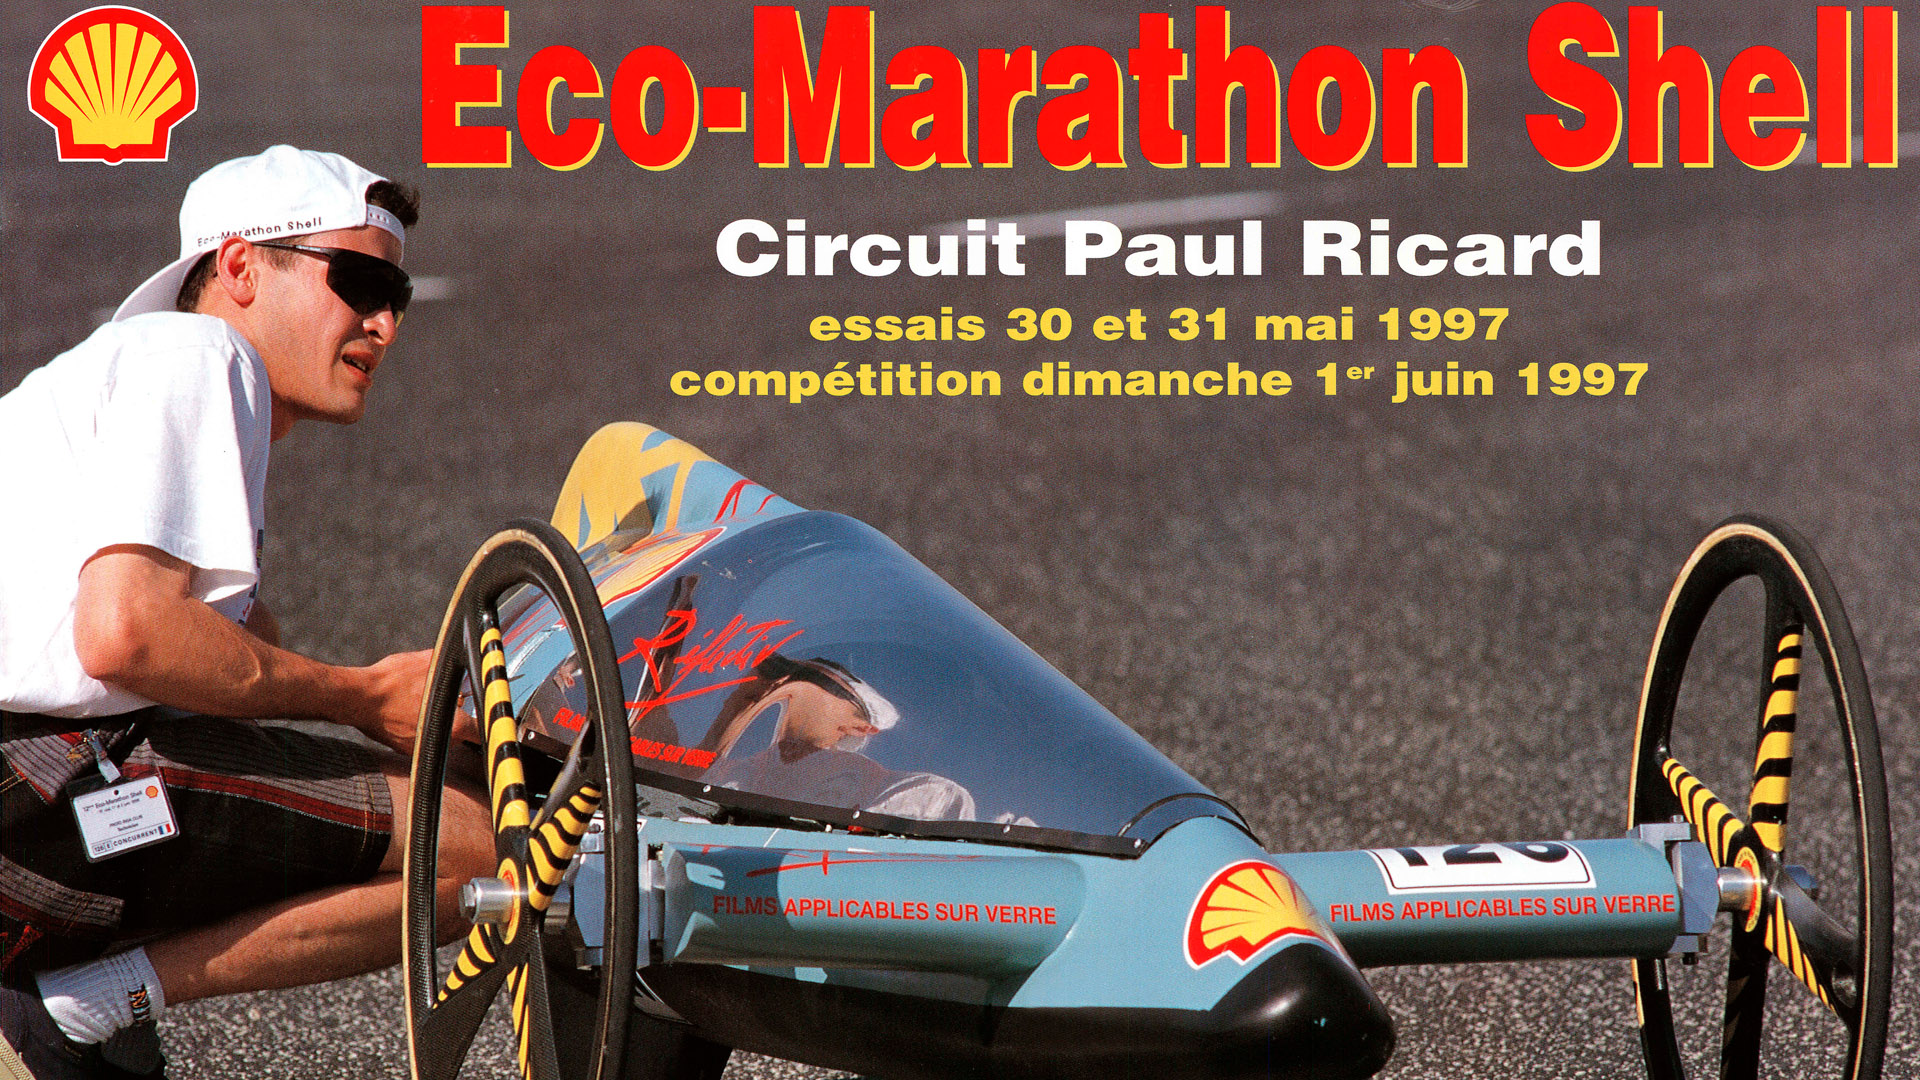 Shell Eco-marathon poster from 1997